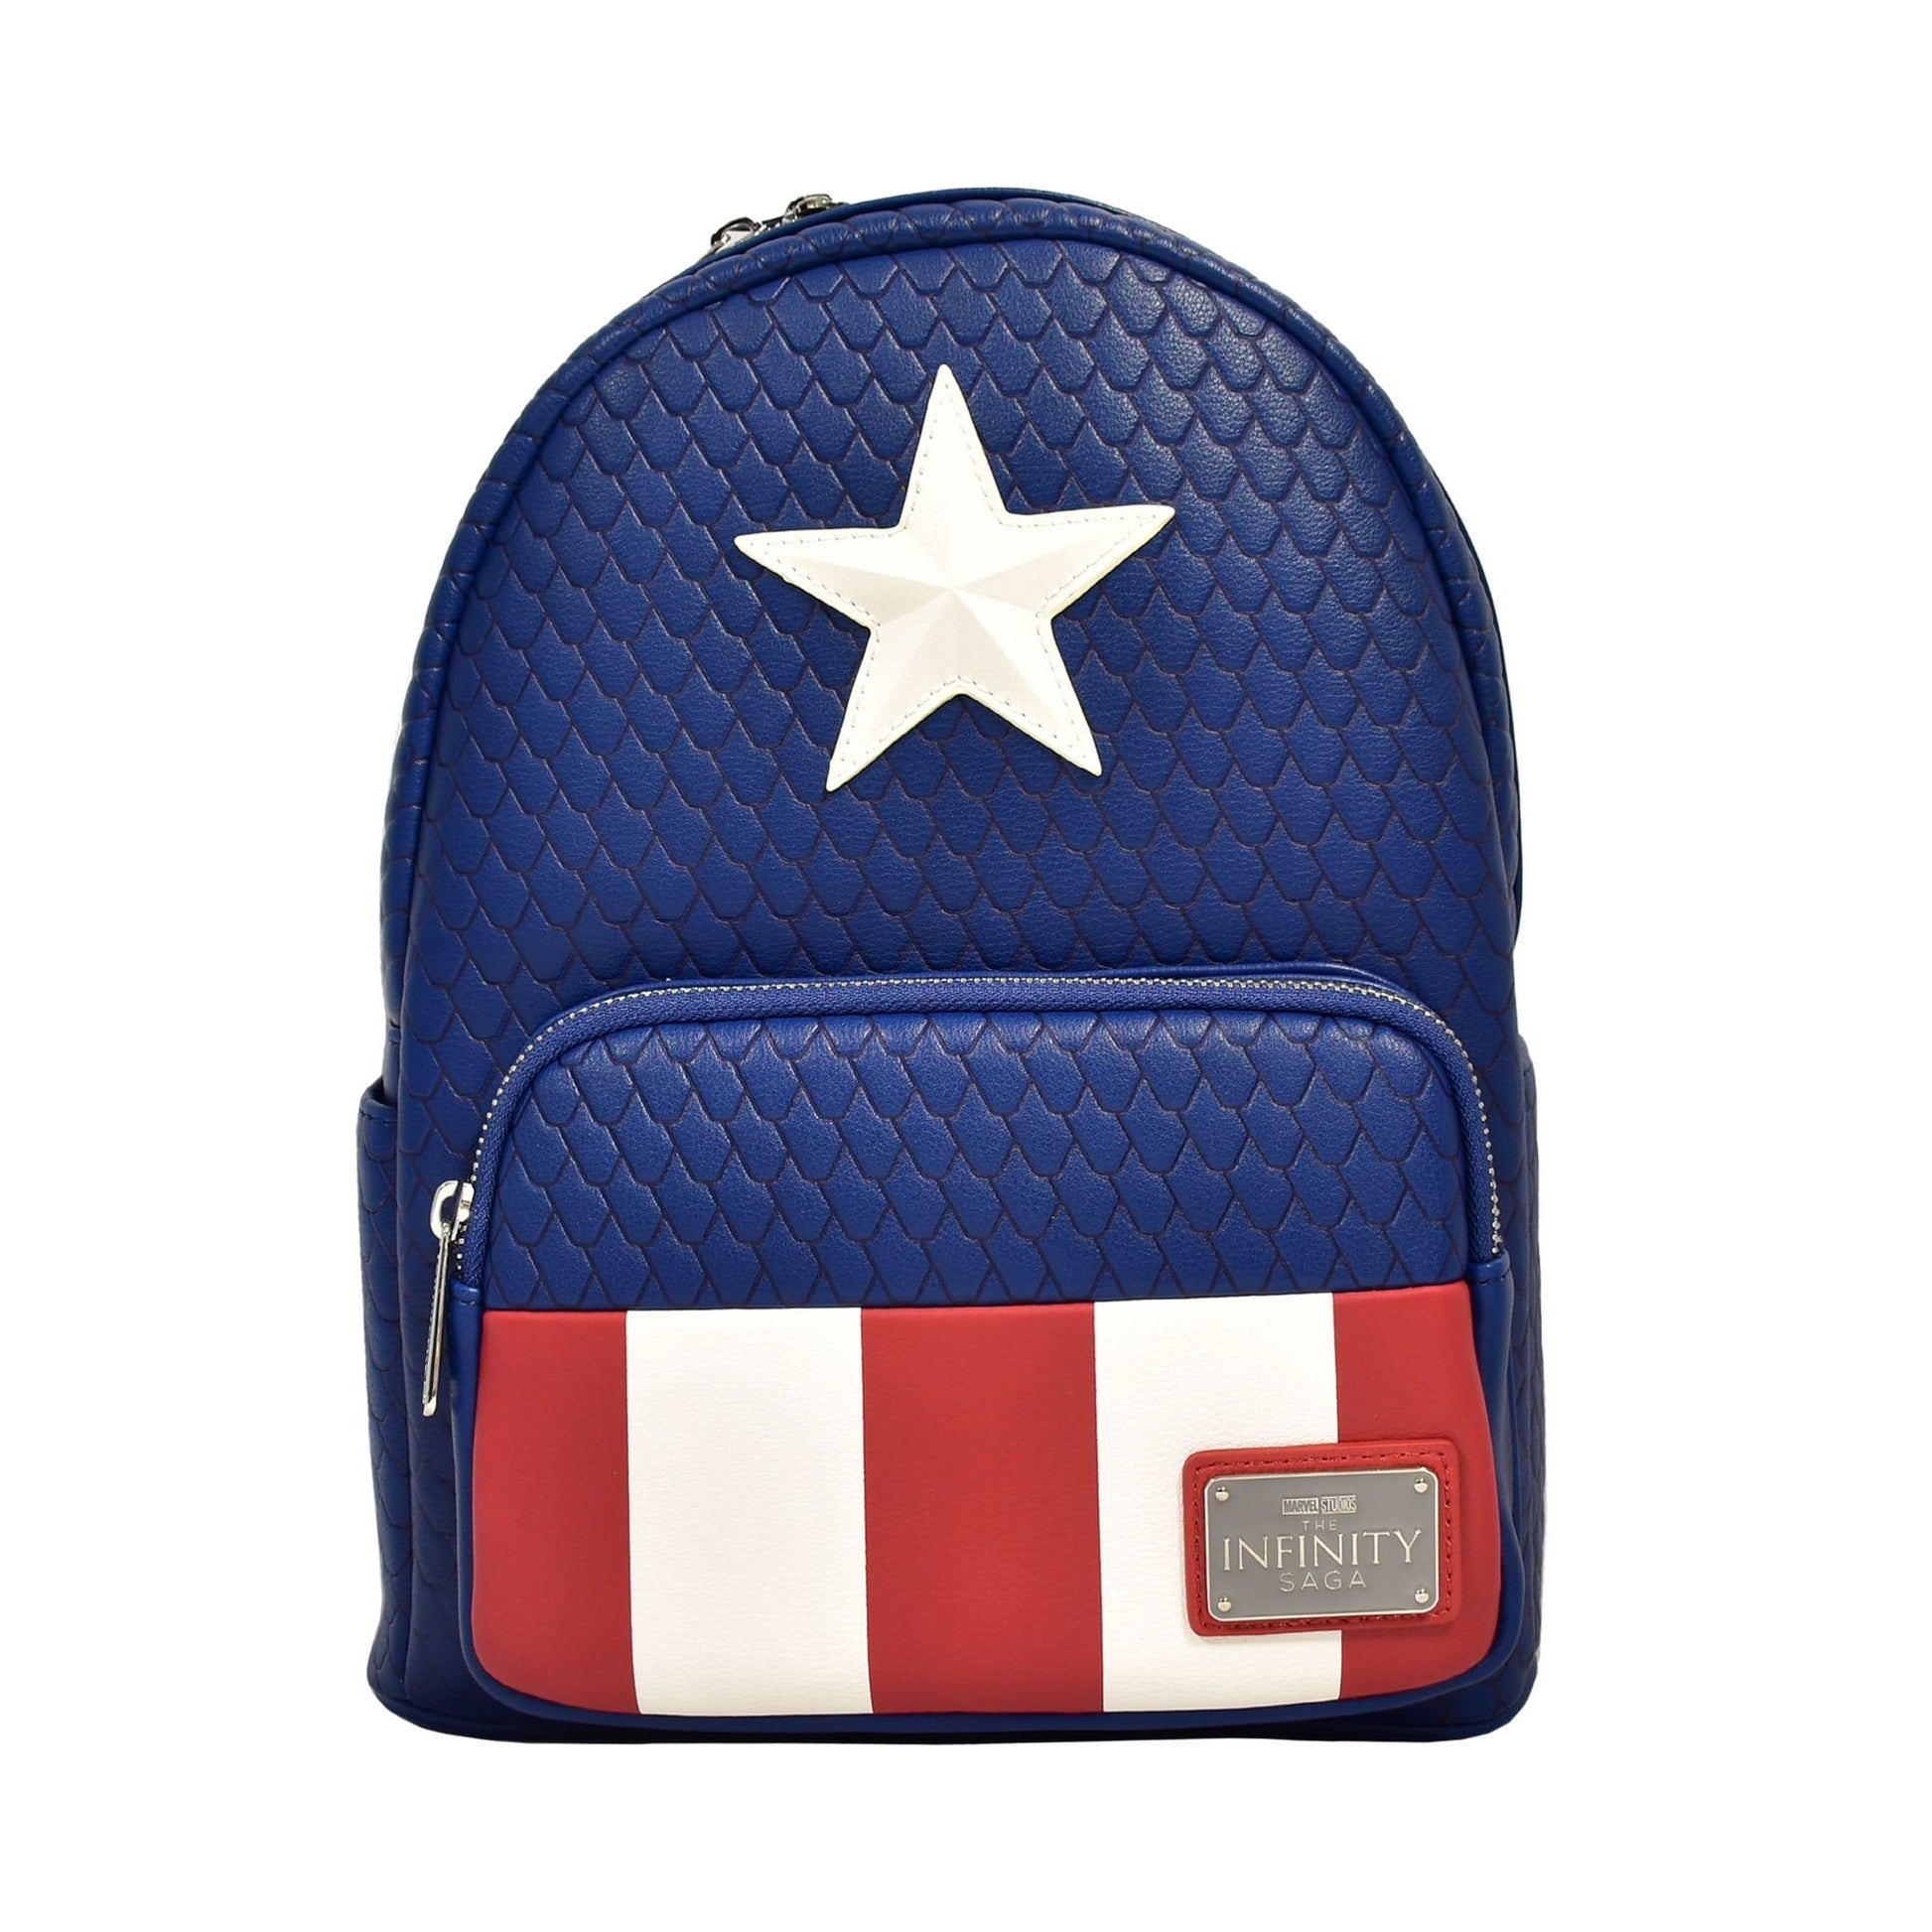 Marvel by Loungefly sac à dos Captain America (Japan Exclusive) Petit Sac à Dos Marvel Captain America Loungefly